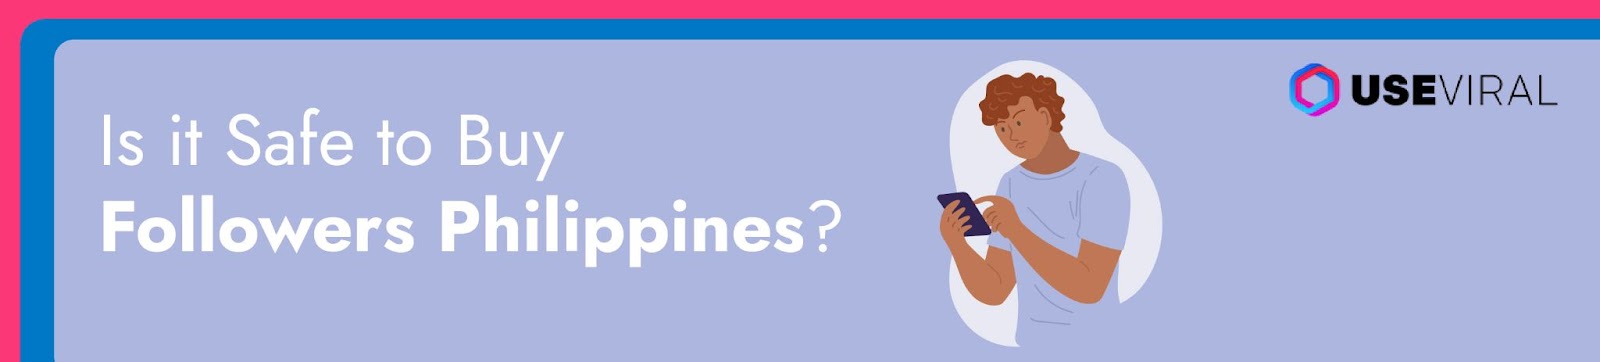 Is it Safe to buy Followers Philippines?